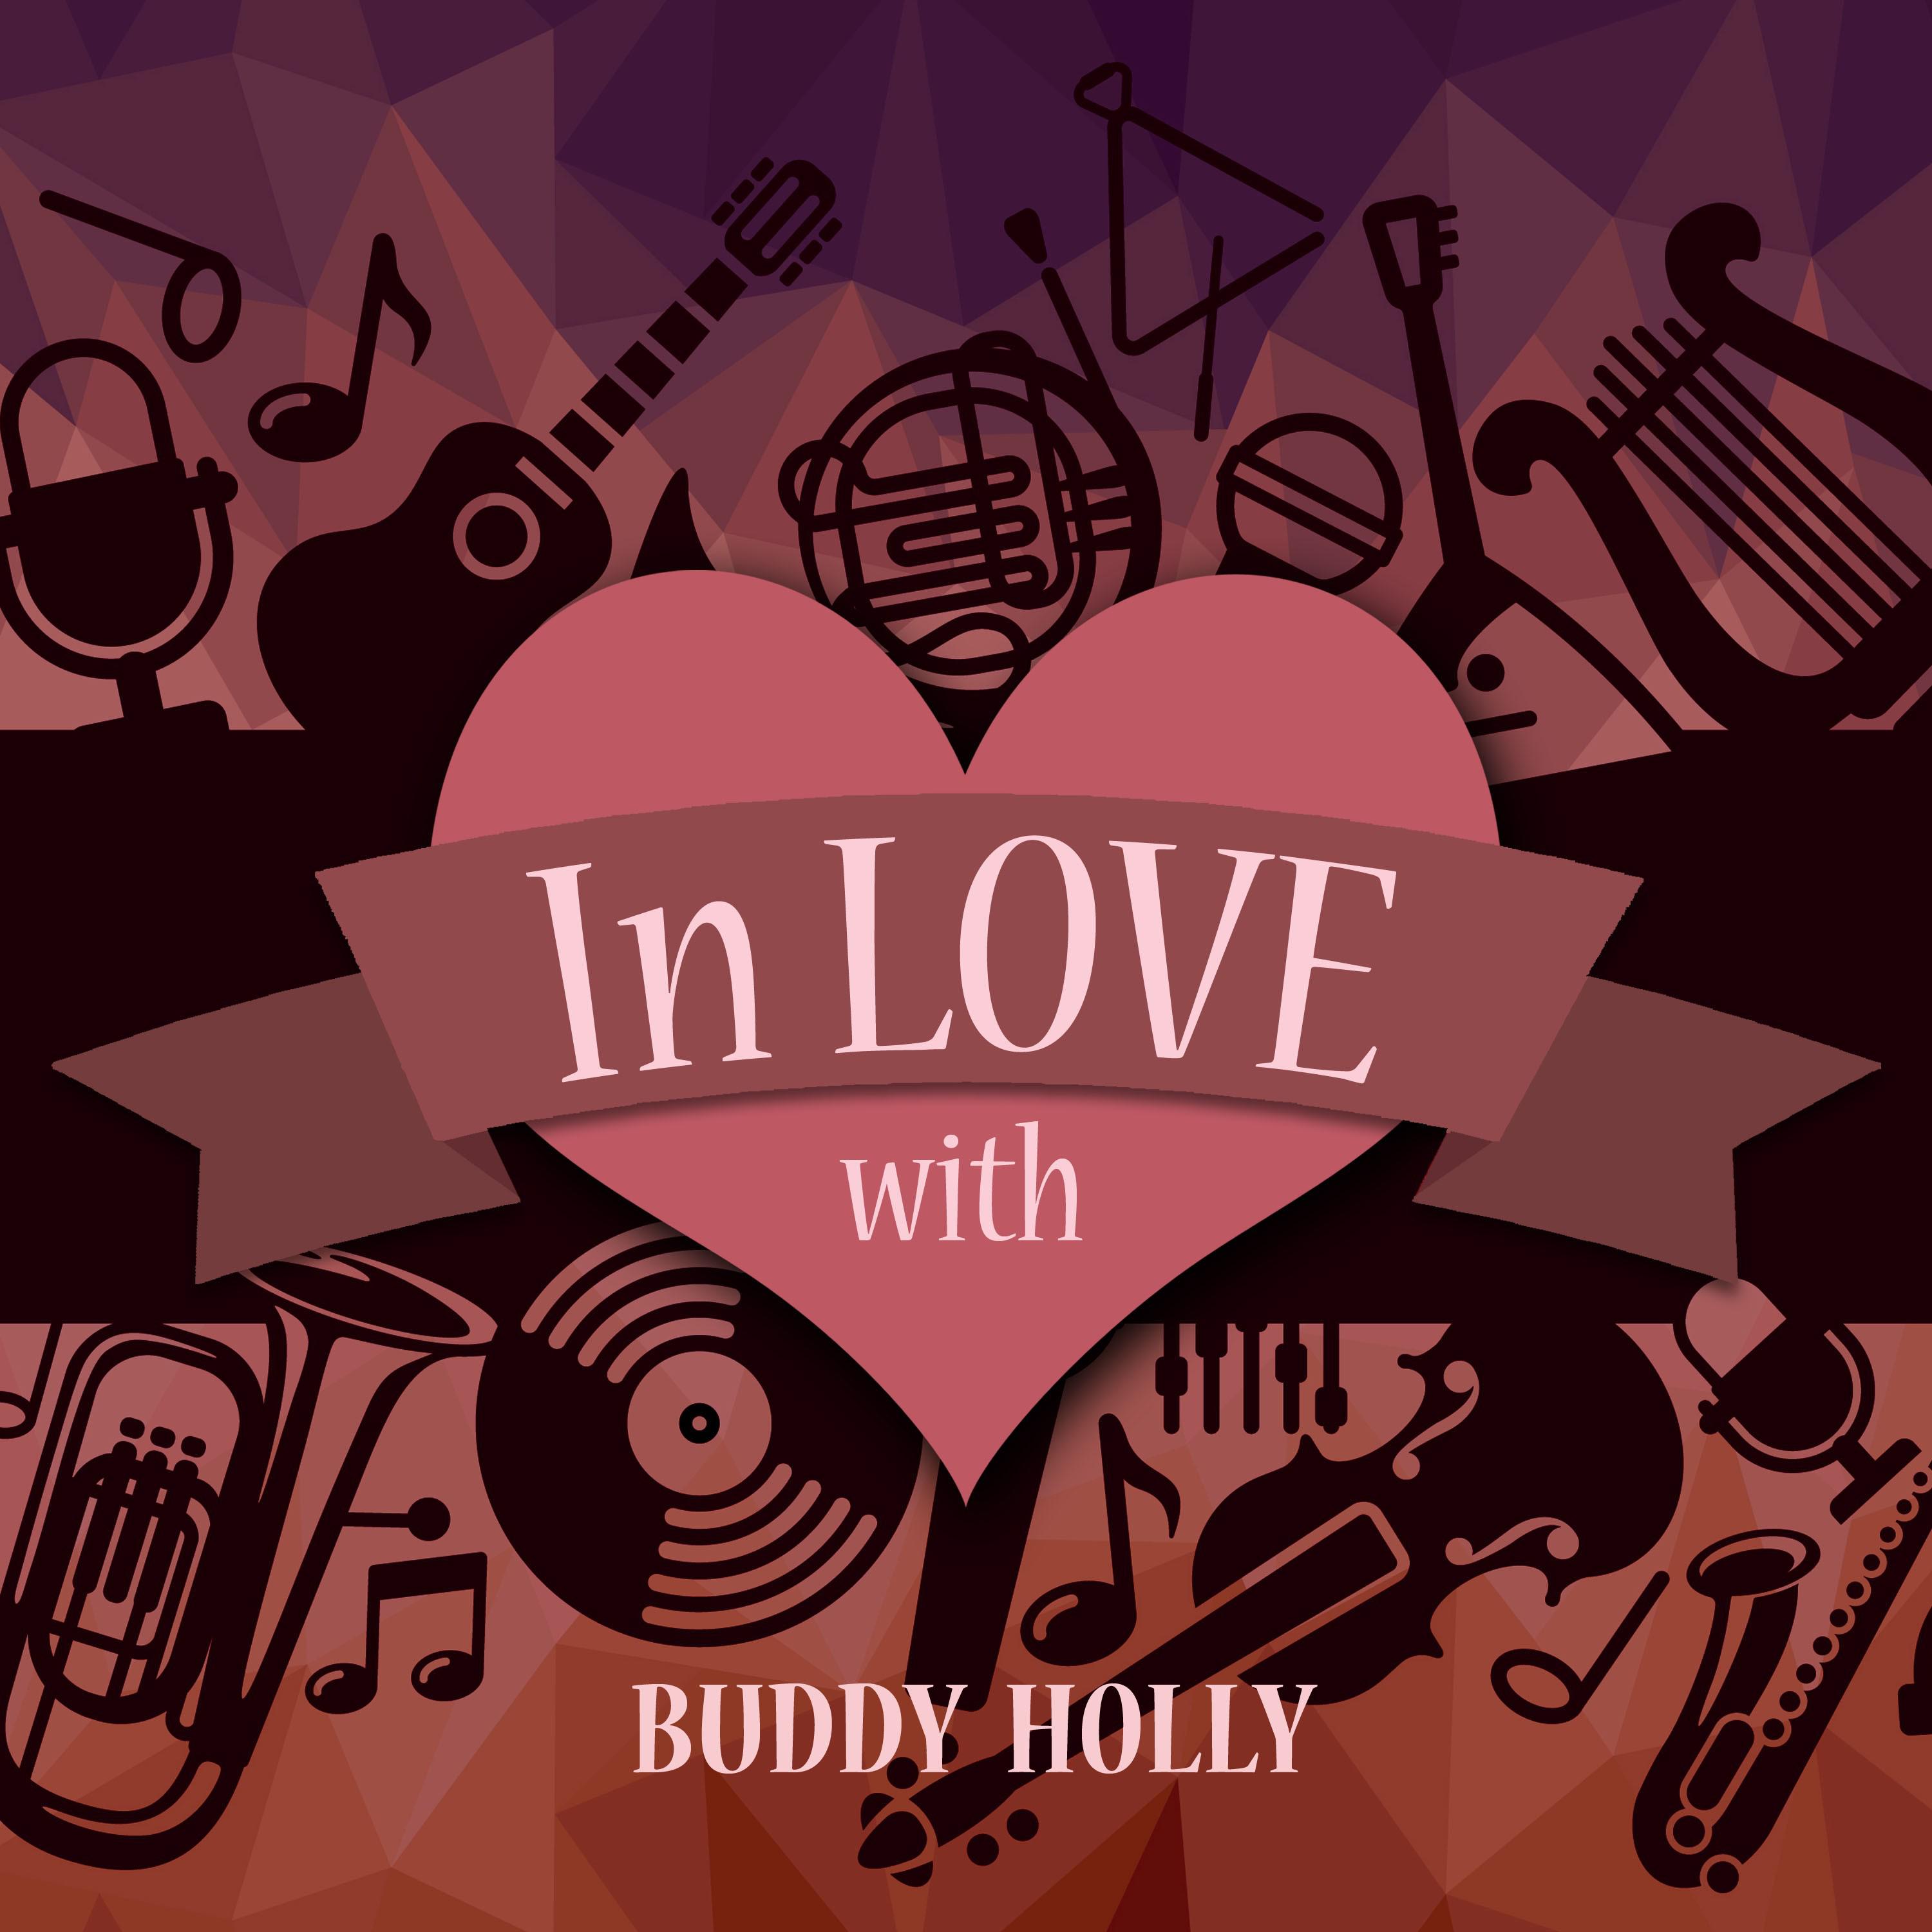 In Love with Buddy Holly